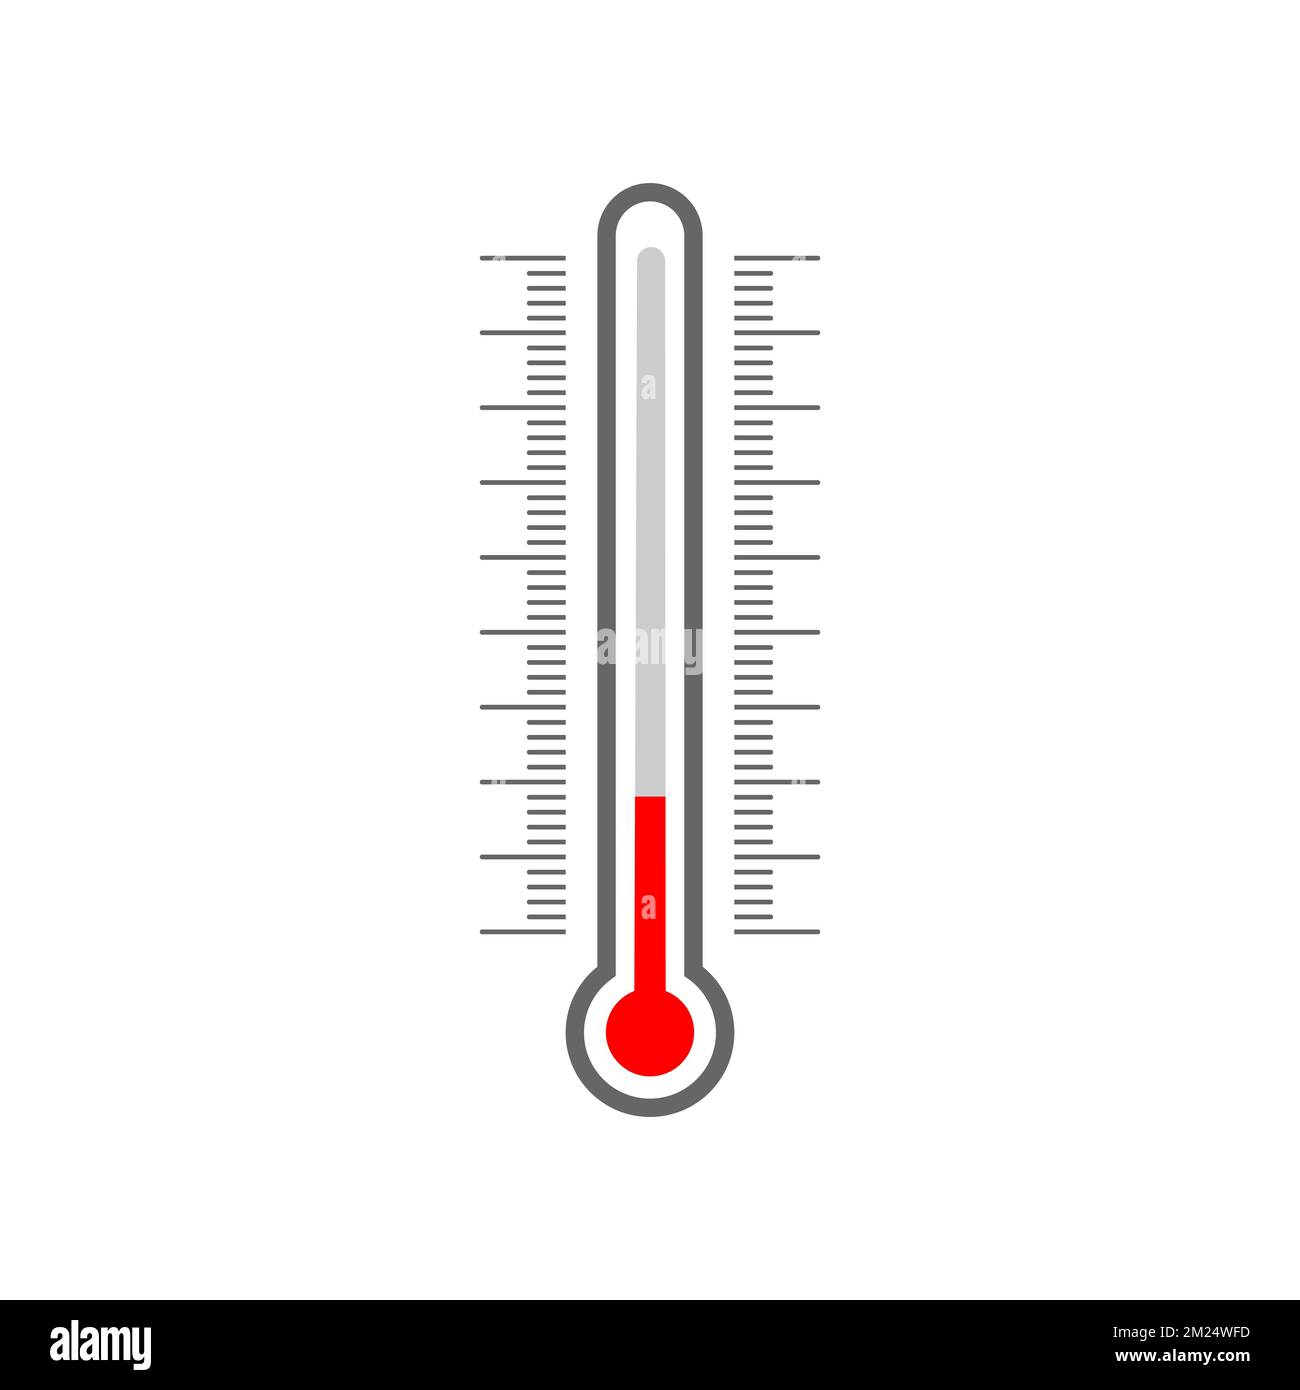 Temperature gauge Cut Out Stock Images & Pictures - Alamy